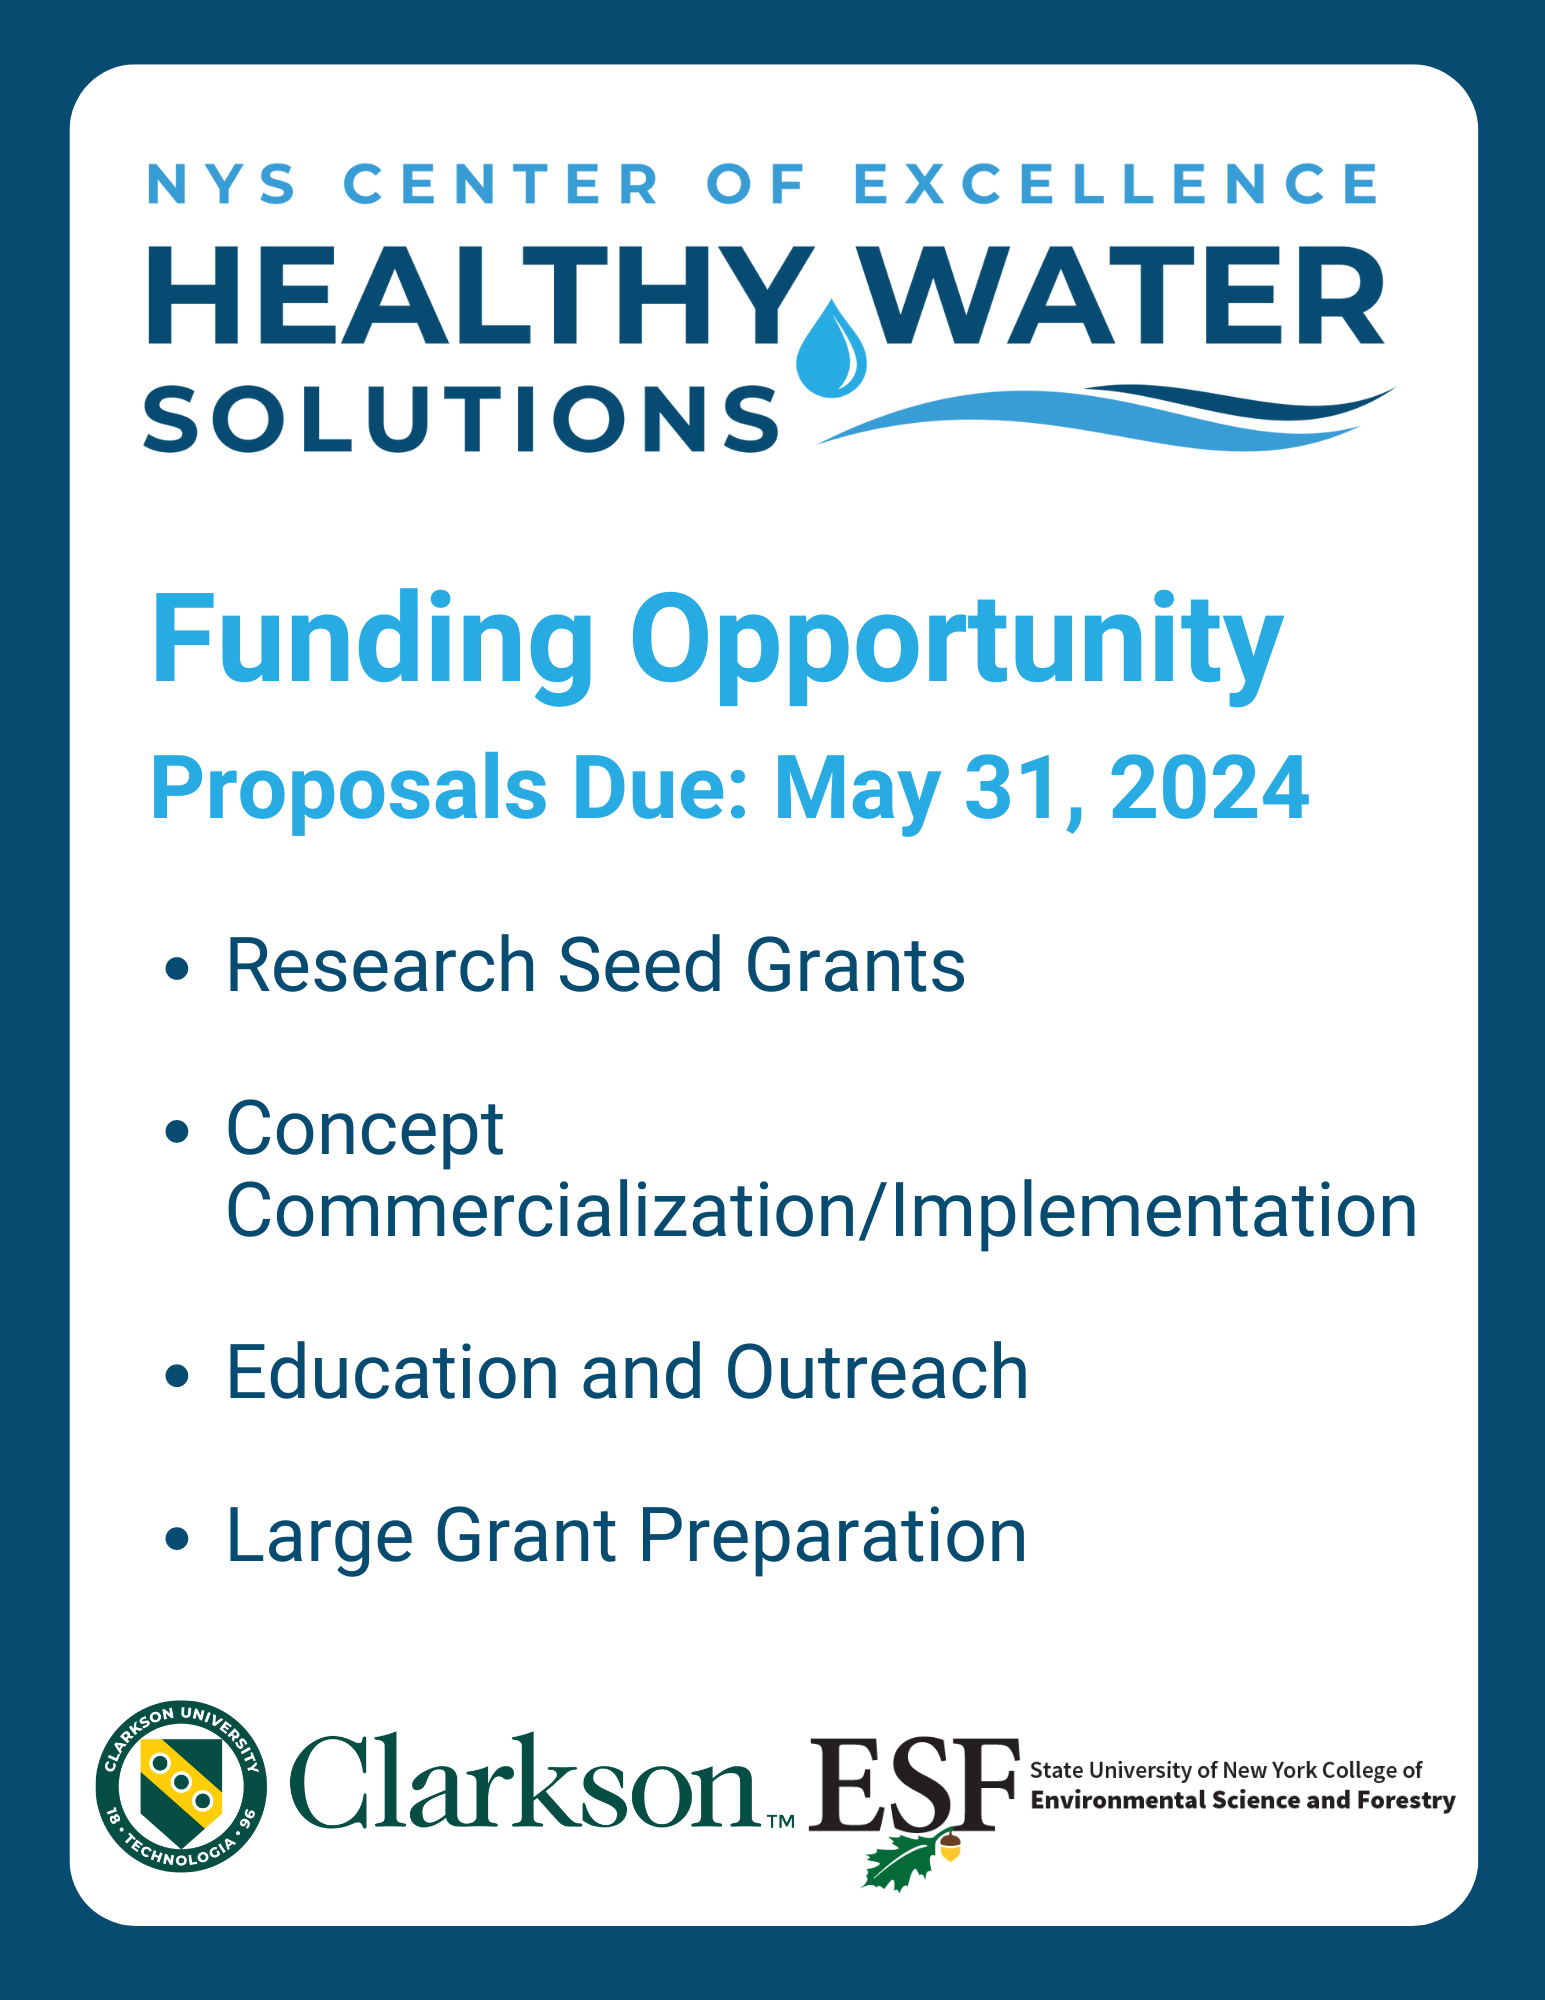 Funding Opportunity from the NYS Center of Excellence in Healthy Water Solutions for Research Seed Grants, Concept Commercialization and Implementation, Education and Outreach, and Large Grant Preparation. Proposals due May 31, 2024.